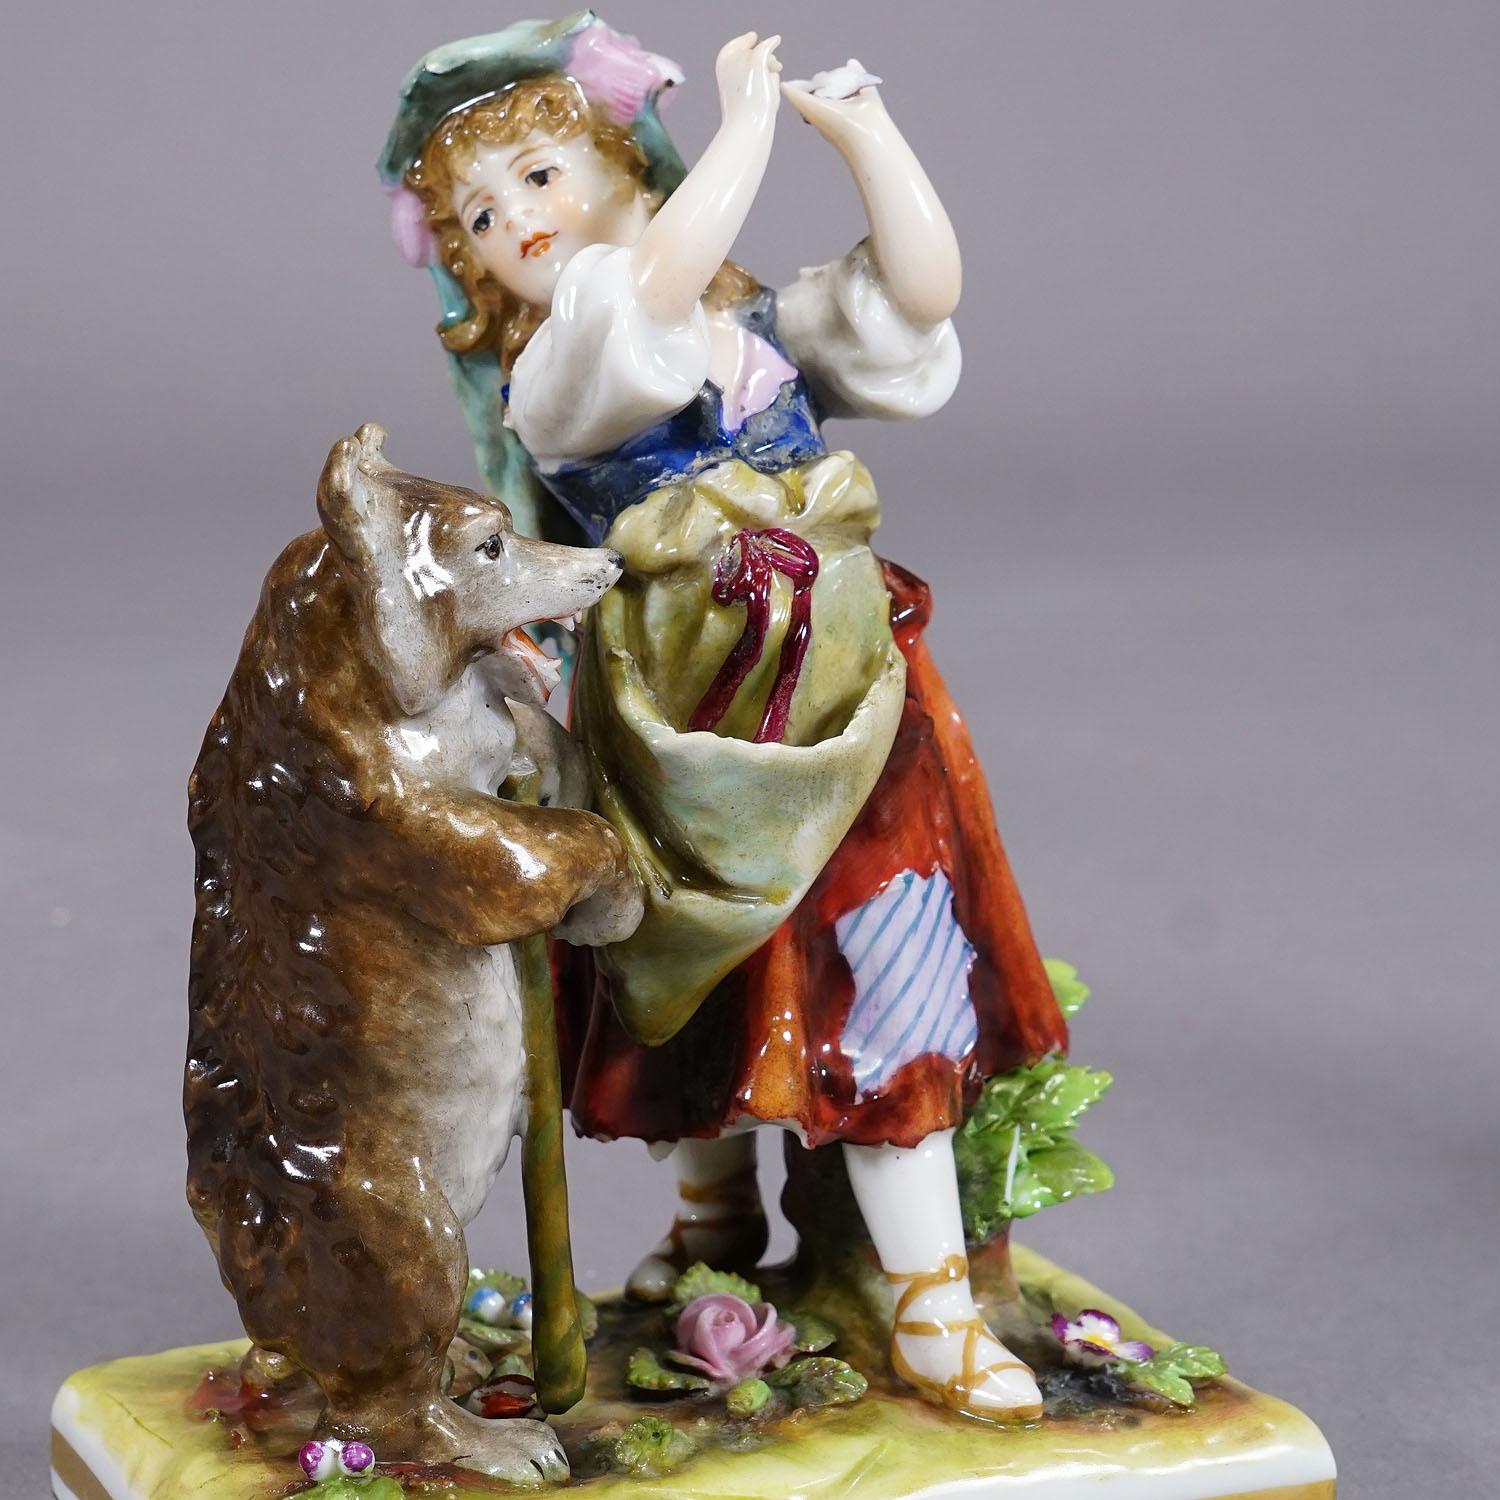 Porcelain Volkstedt Porcellain Figurines Children with Bears